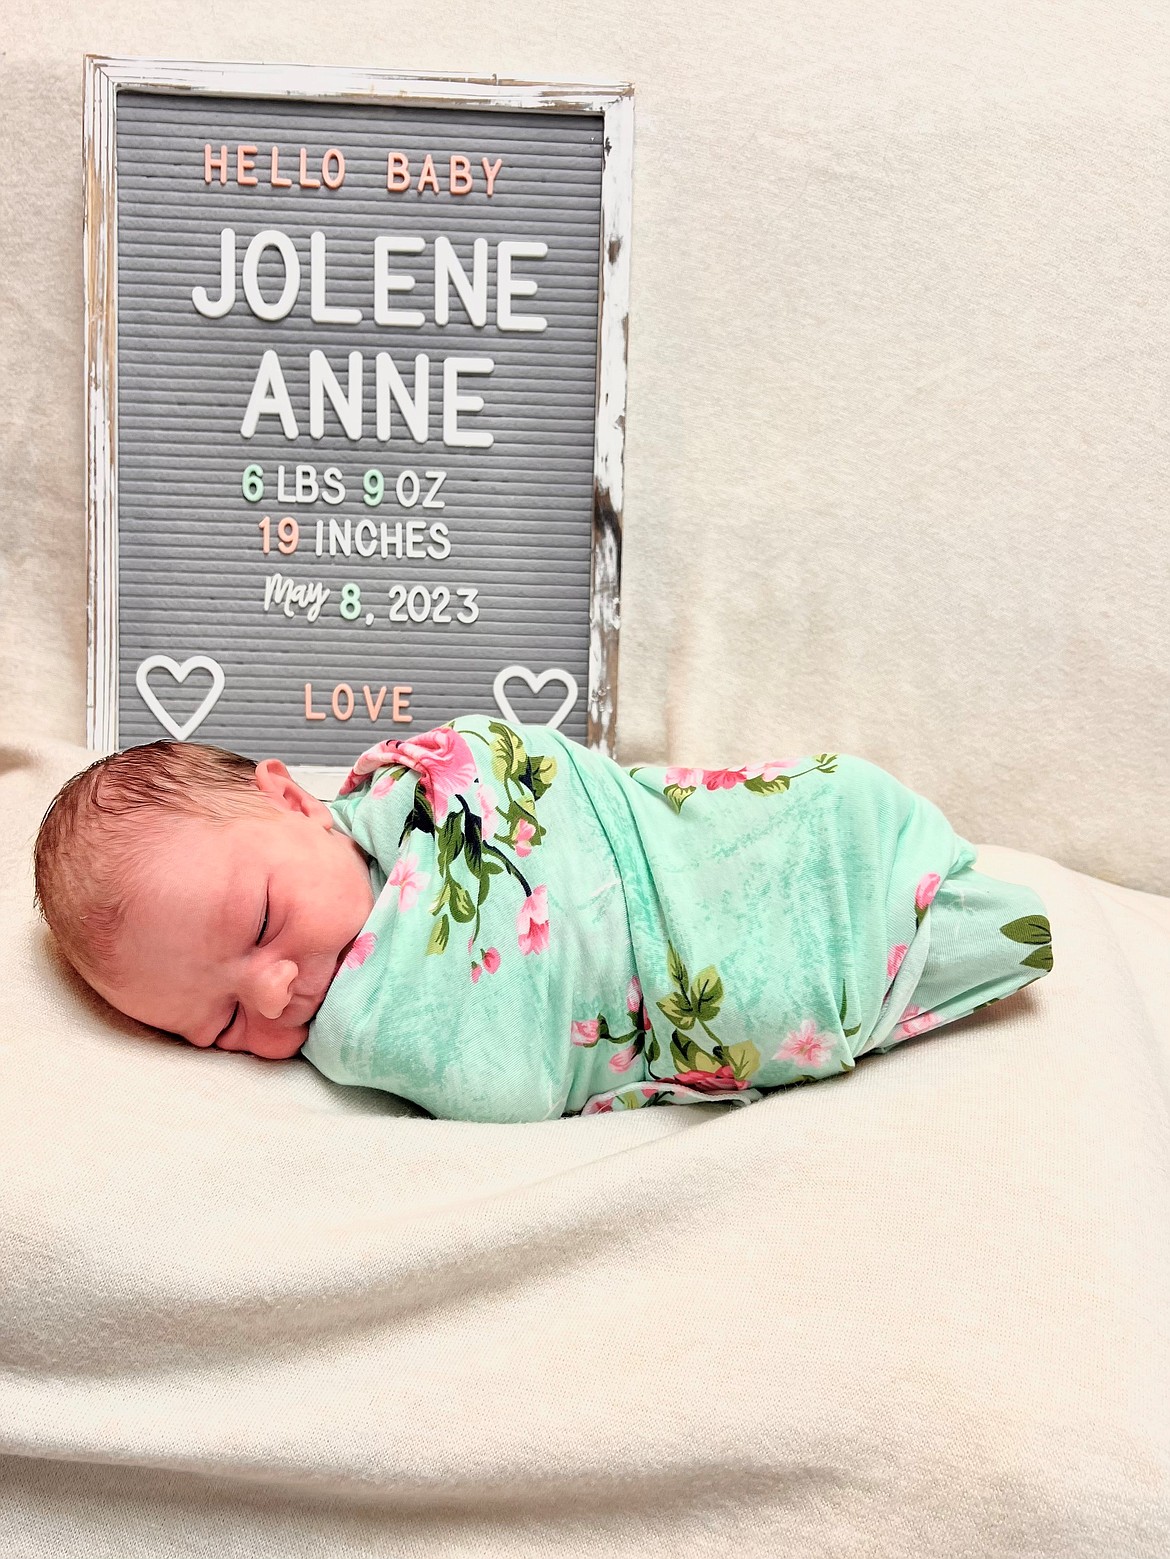 Jolene Anne Frankhauser was born May 8, 2023 at Clark Fork Valley Hospital. She was 6 pounds, 9 ounces and 19 3/8 inches long. Parents are Natalie and Jason Frankhauser. Maternal grandparents are Thomas Ruzicka and Tracy Ruzicka. Paternal grandparents are Tom Price and Diane Price.